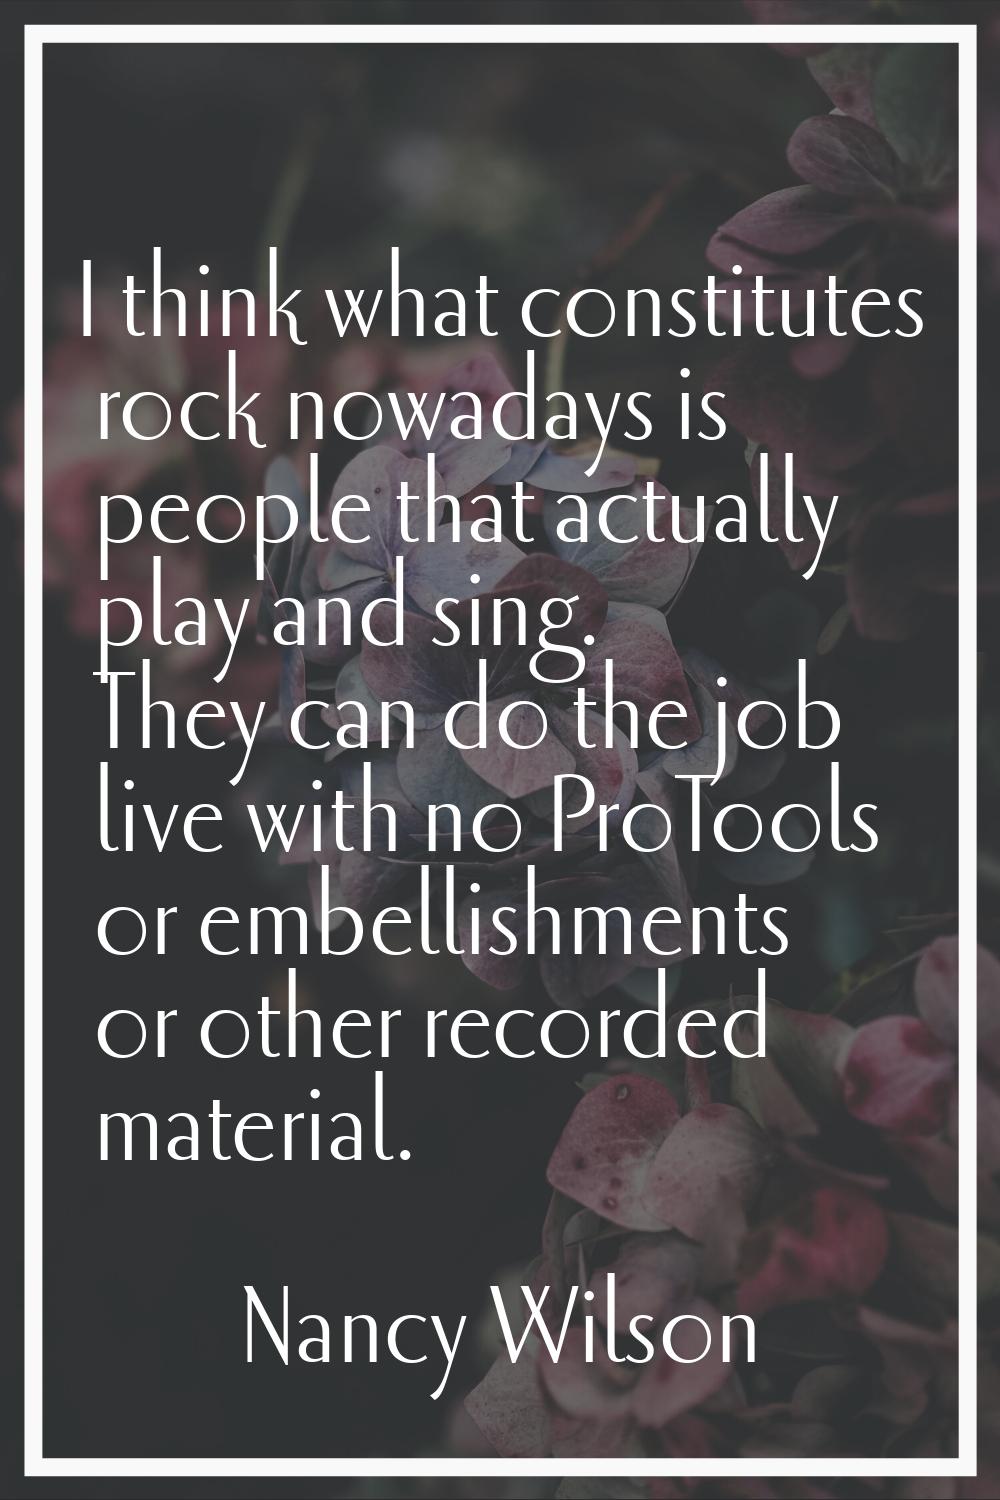 I think what constitutes rock nowadays is people that actually play and sing. They can do the job l